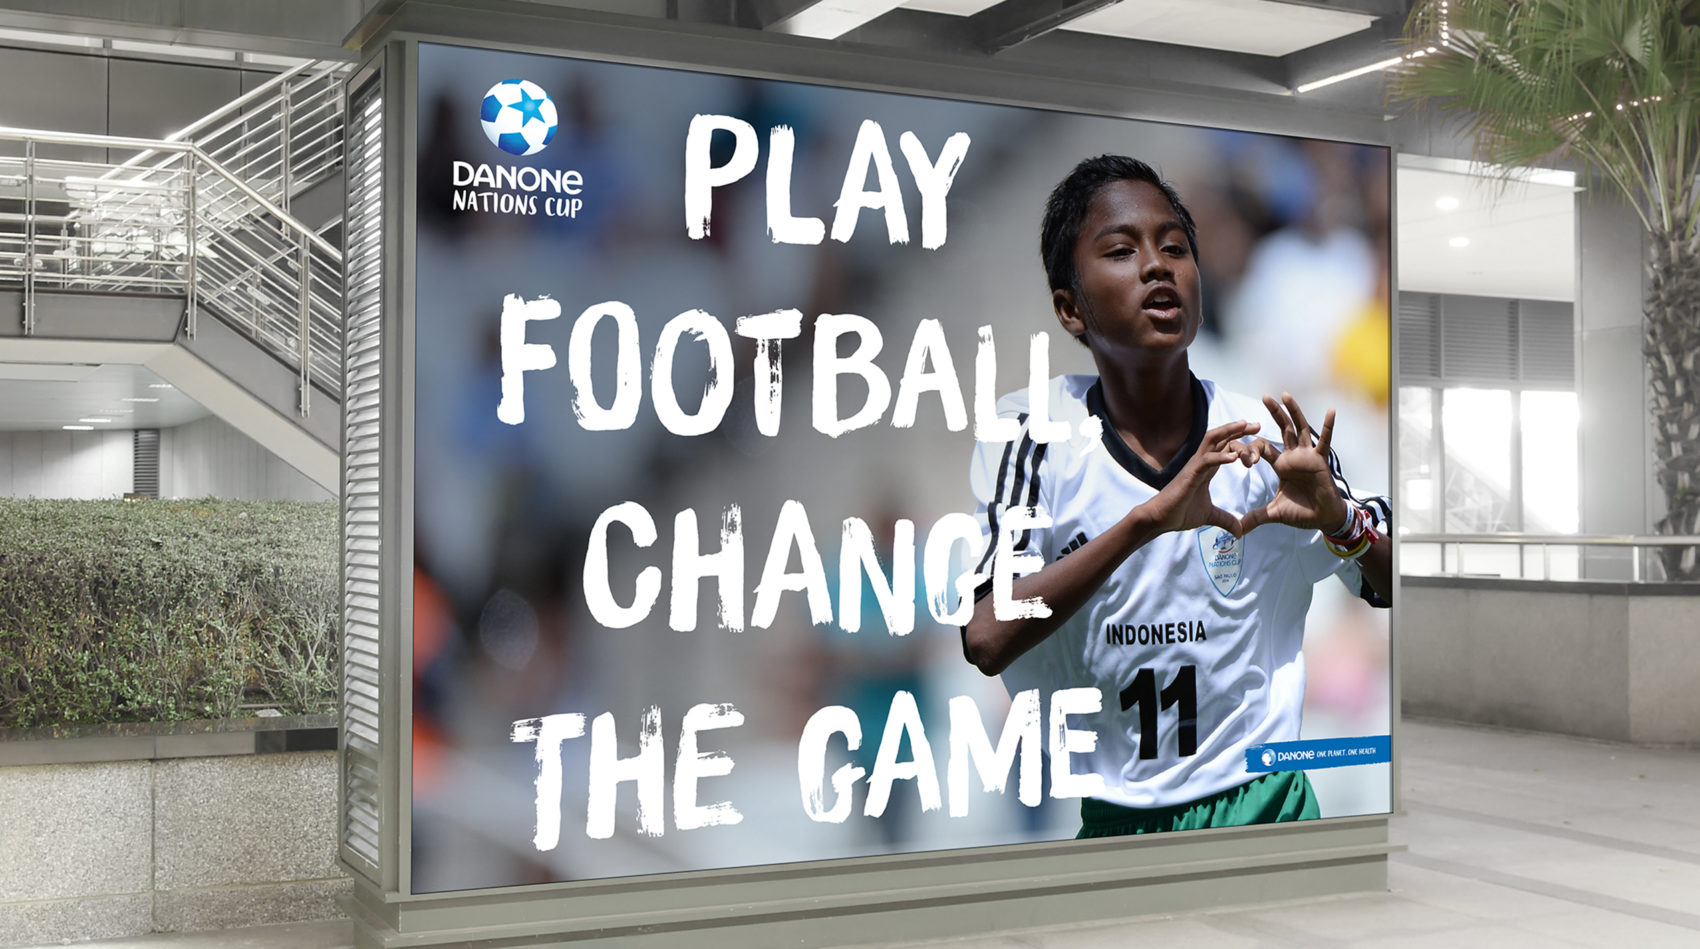 Projet_project_Danone_Nations_Cup_edition_2019_campagne_campaign_communication_globale_global_branding_2